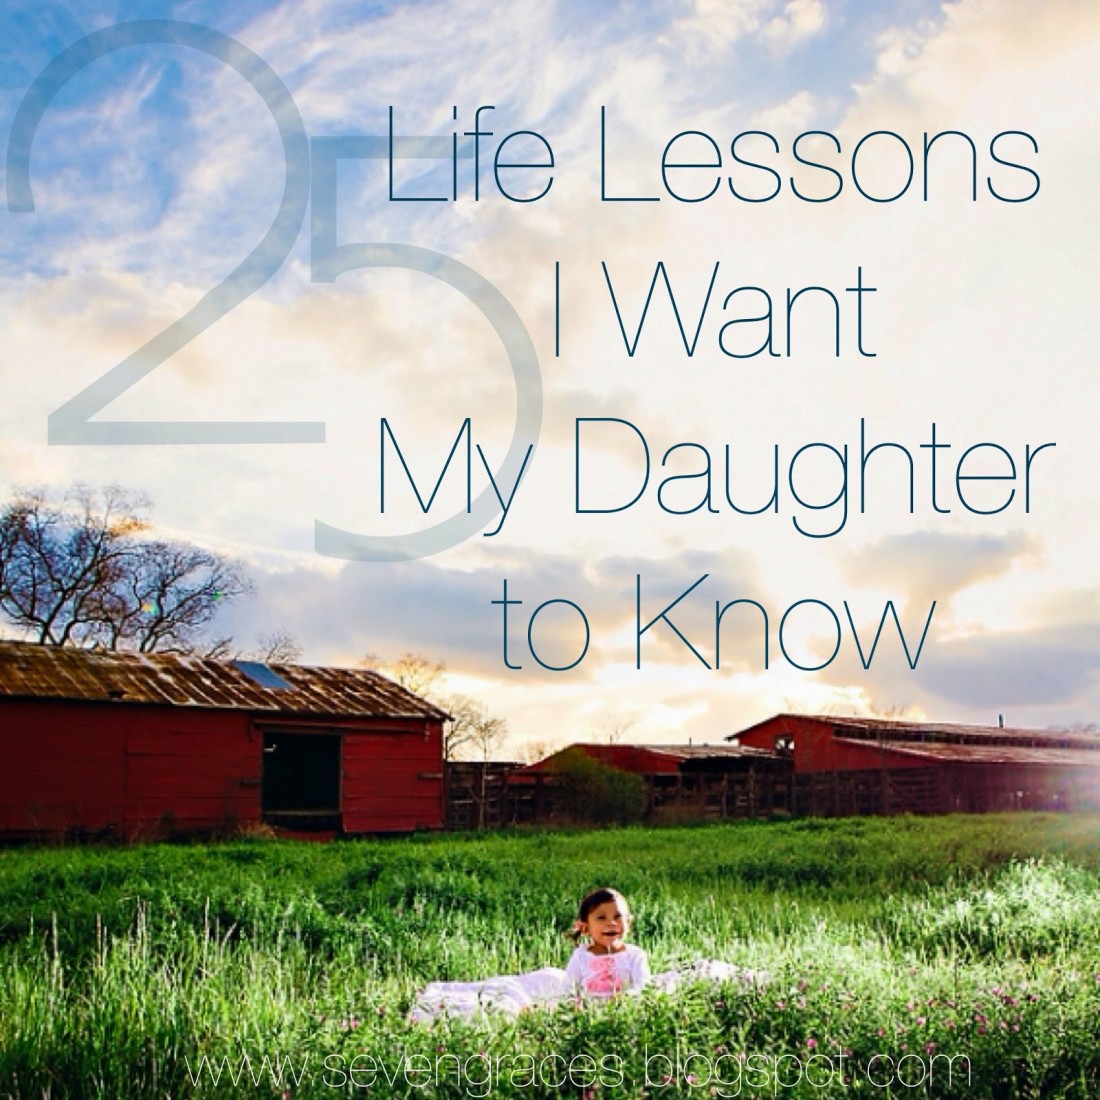 25 Life Lessons I Want My Daughter to Know